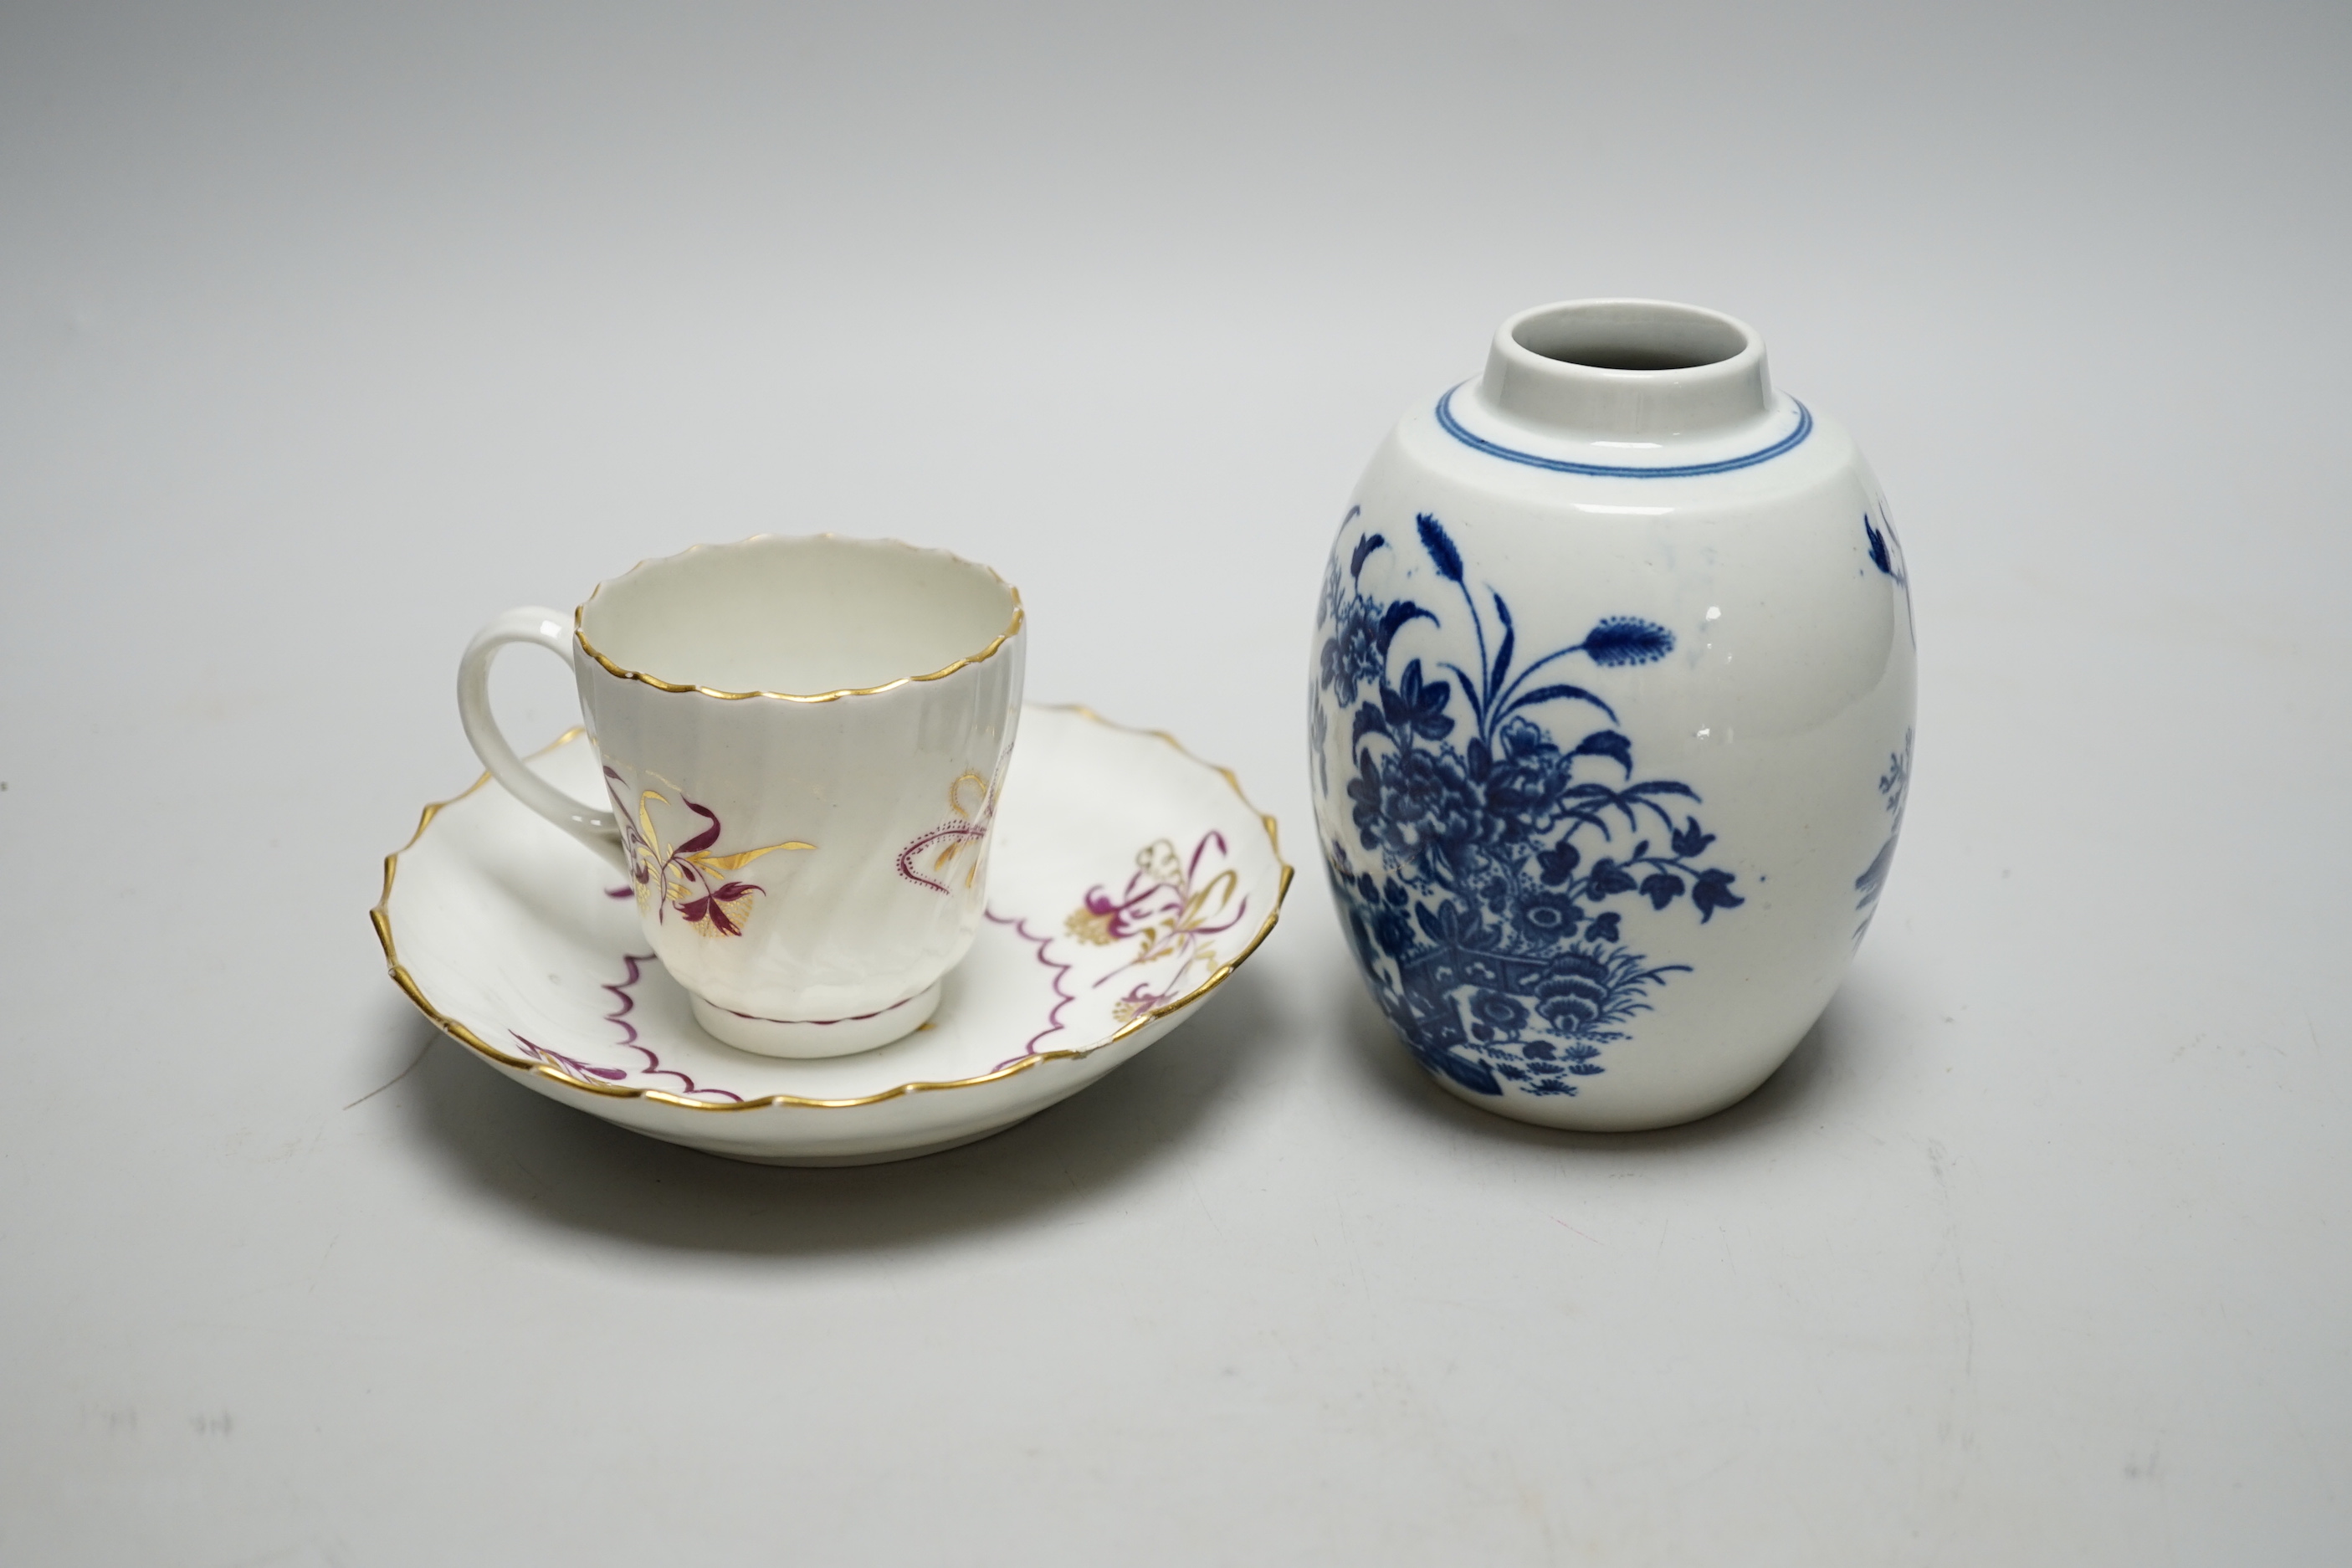 A Worcester Fence pattern tea canister, c.1775, and a Worcester wrythen coffee cup and saucer, c.1795